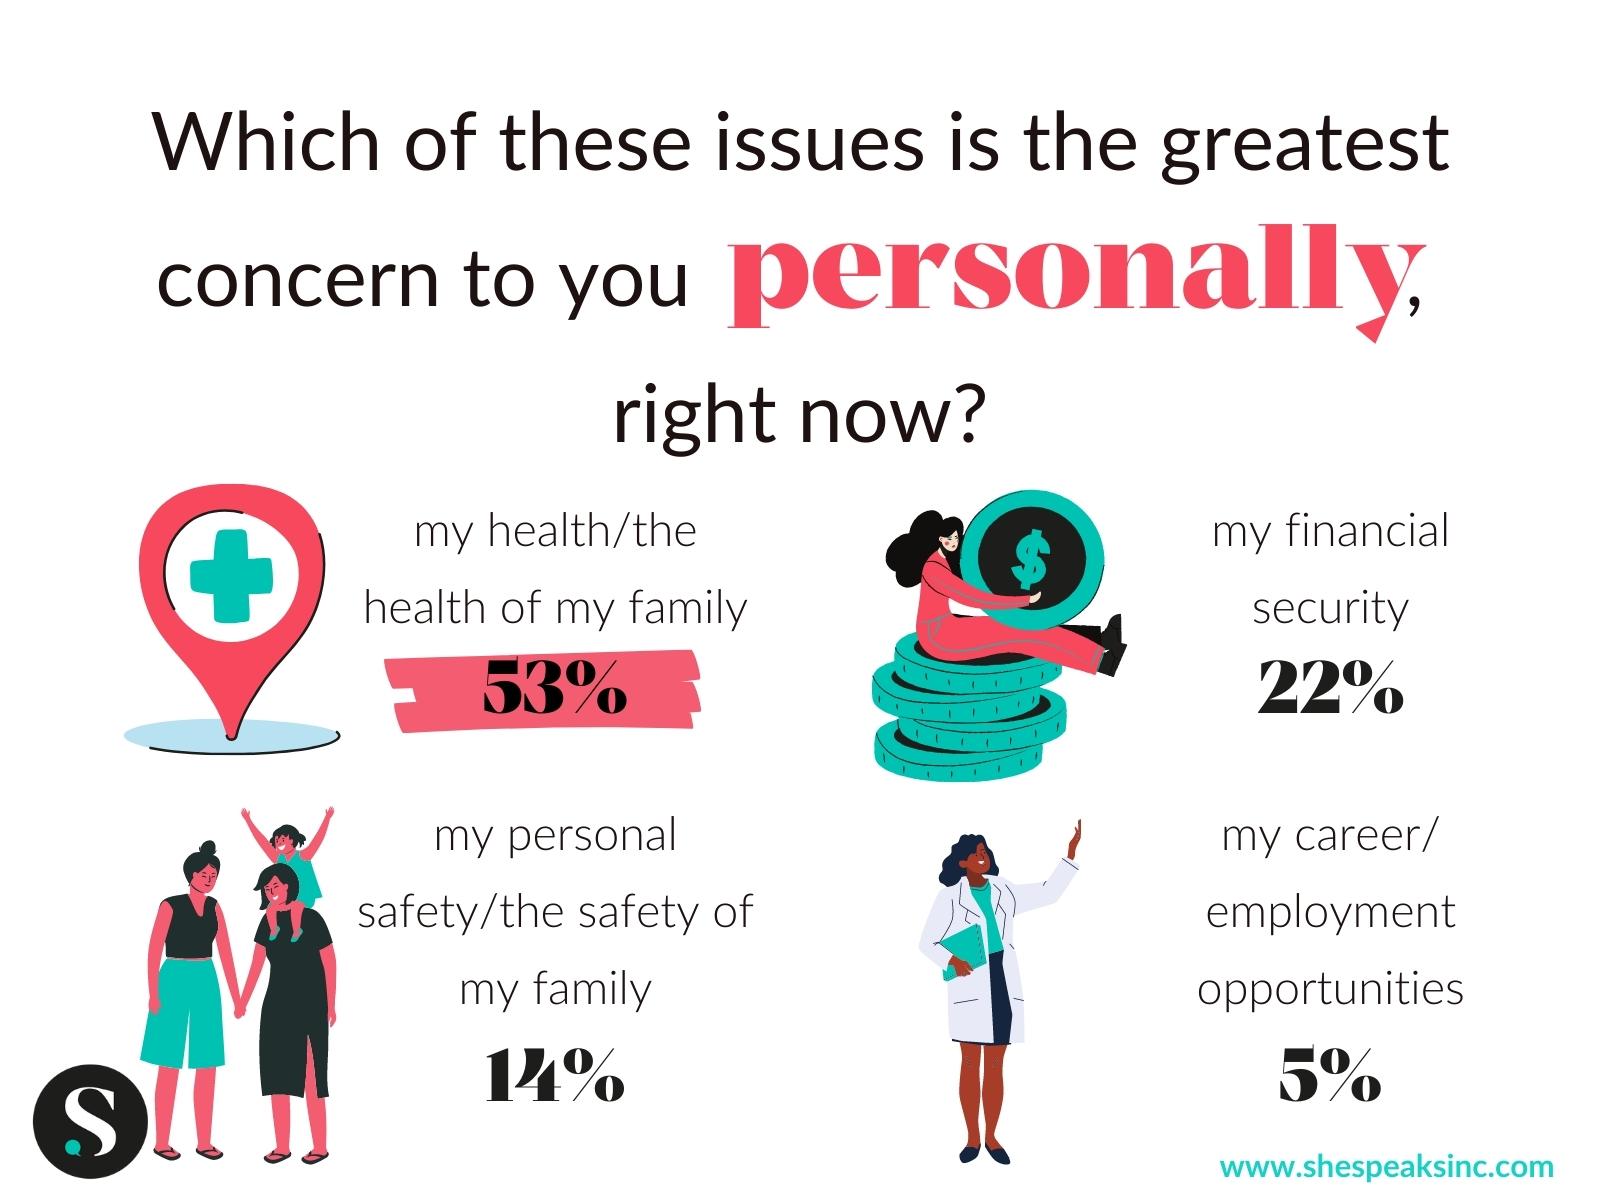 What Issues are of Greatest Concern Personally?